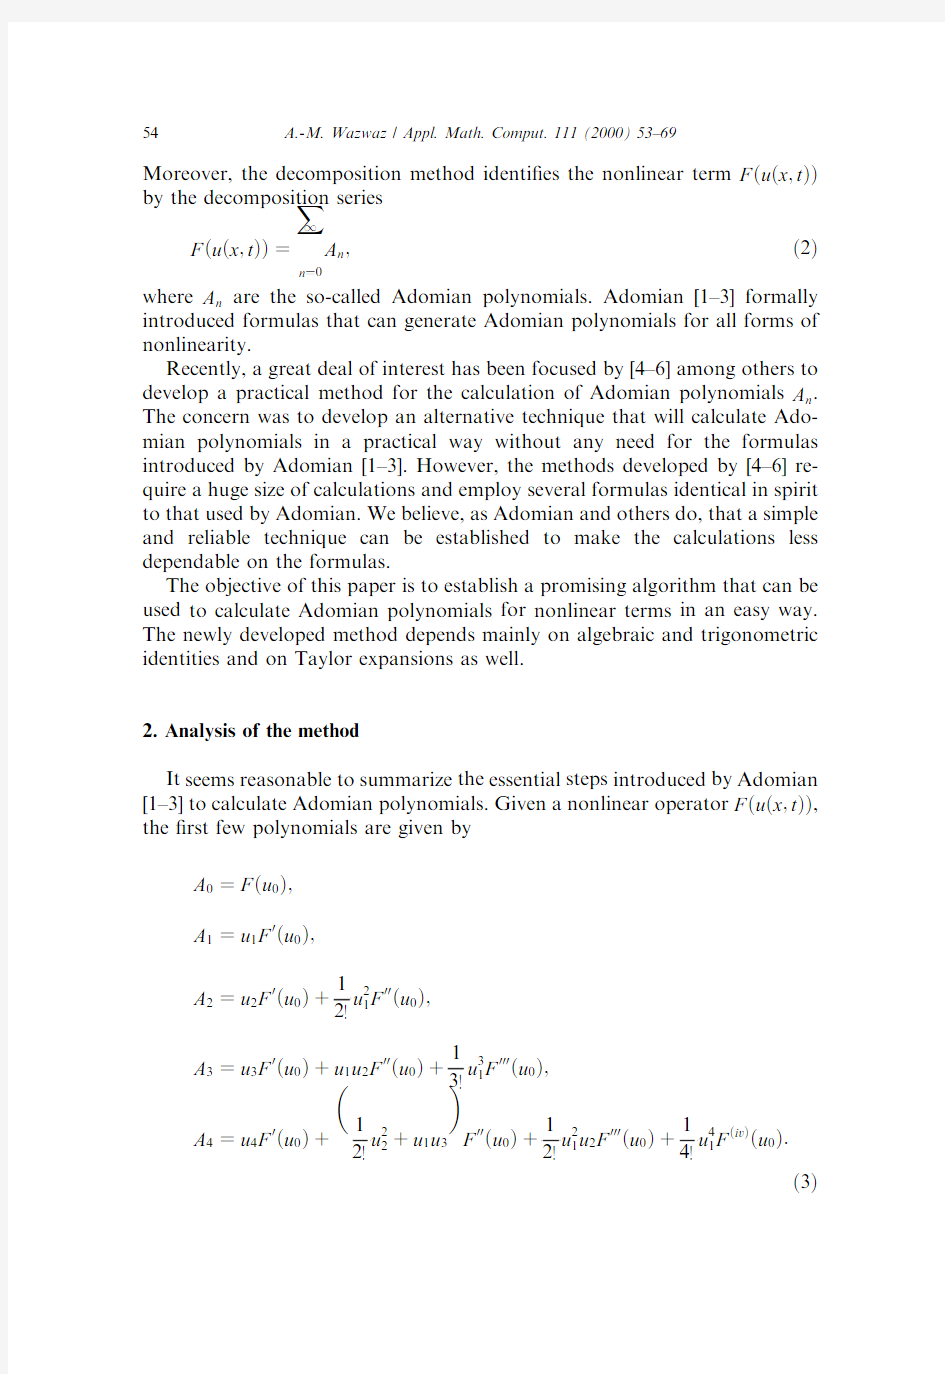 A new algorithm for calculating adomian